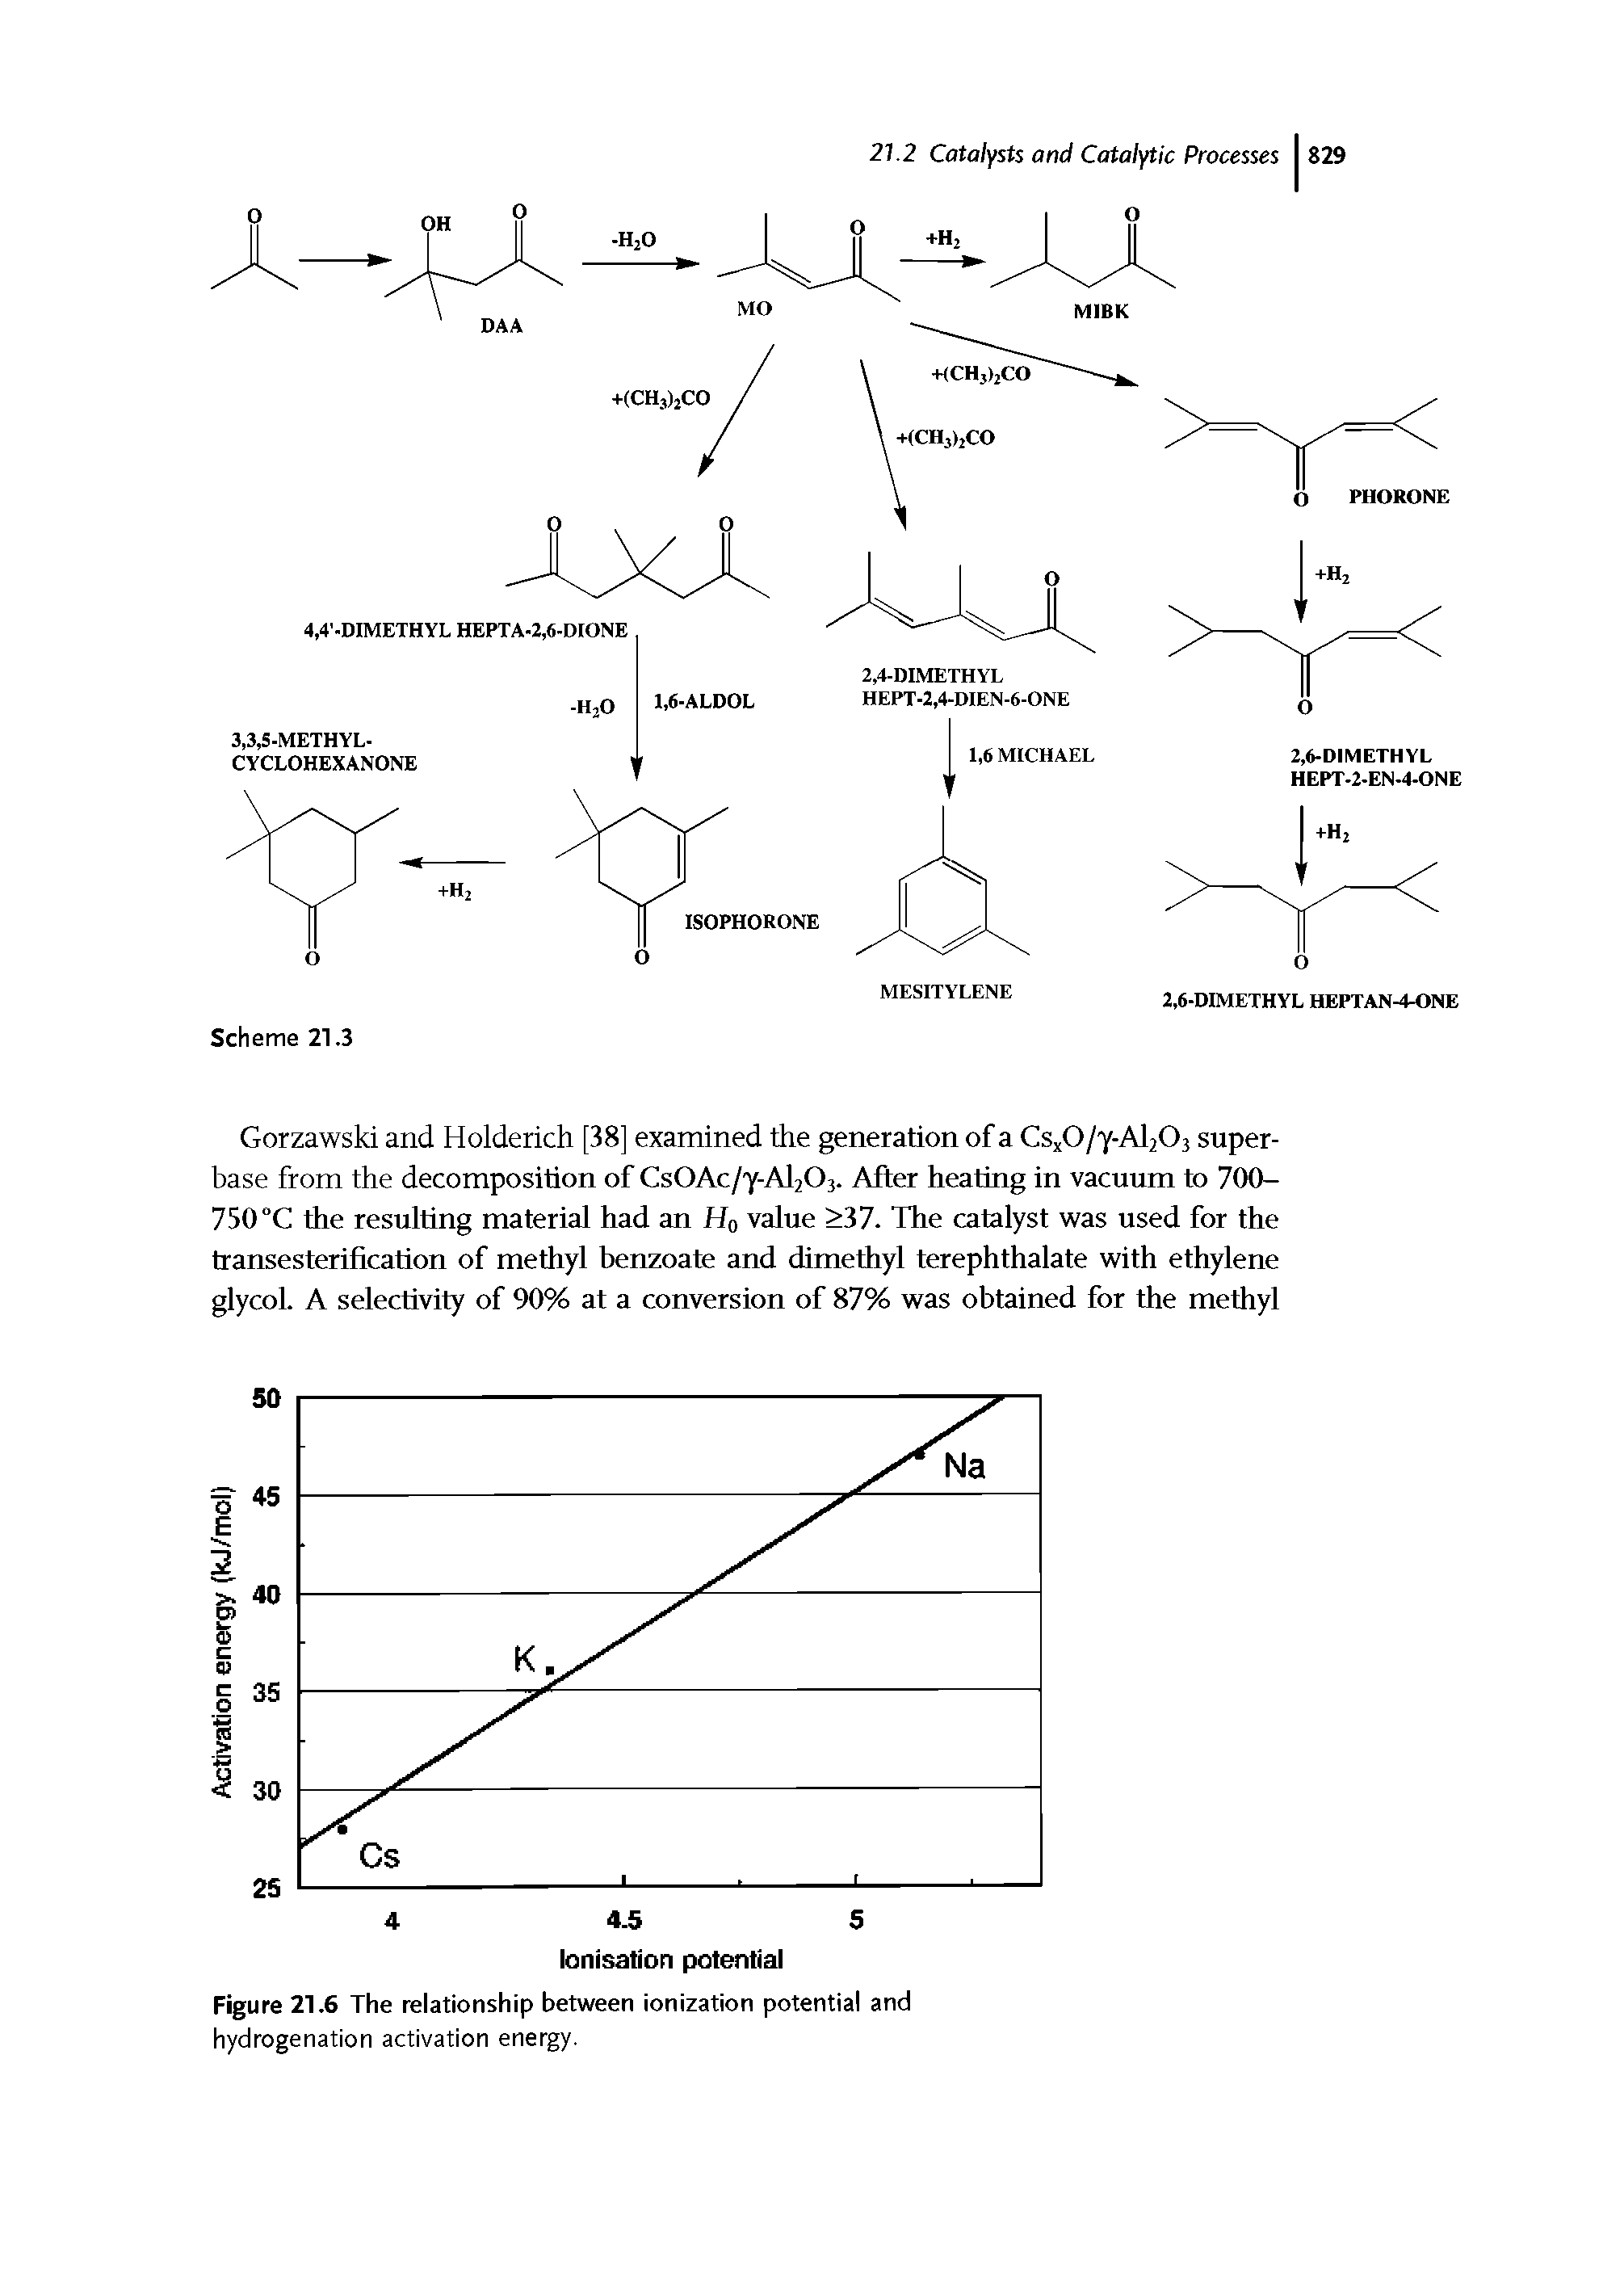 Figure 21.6 The relationship between ionization potential and hydrogenation activation energy.